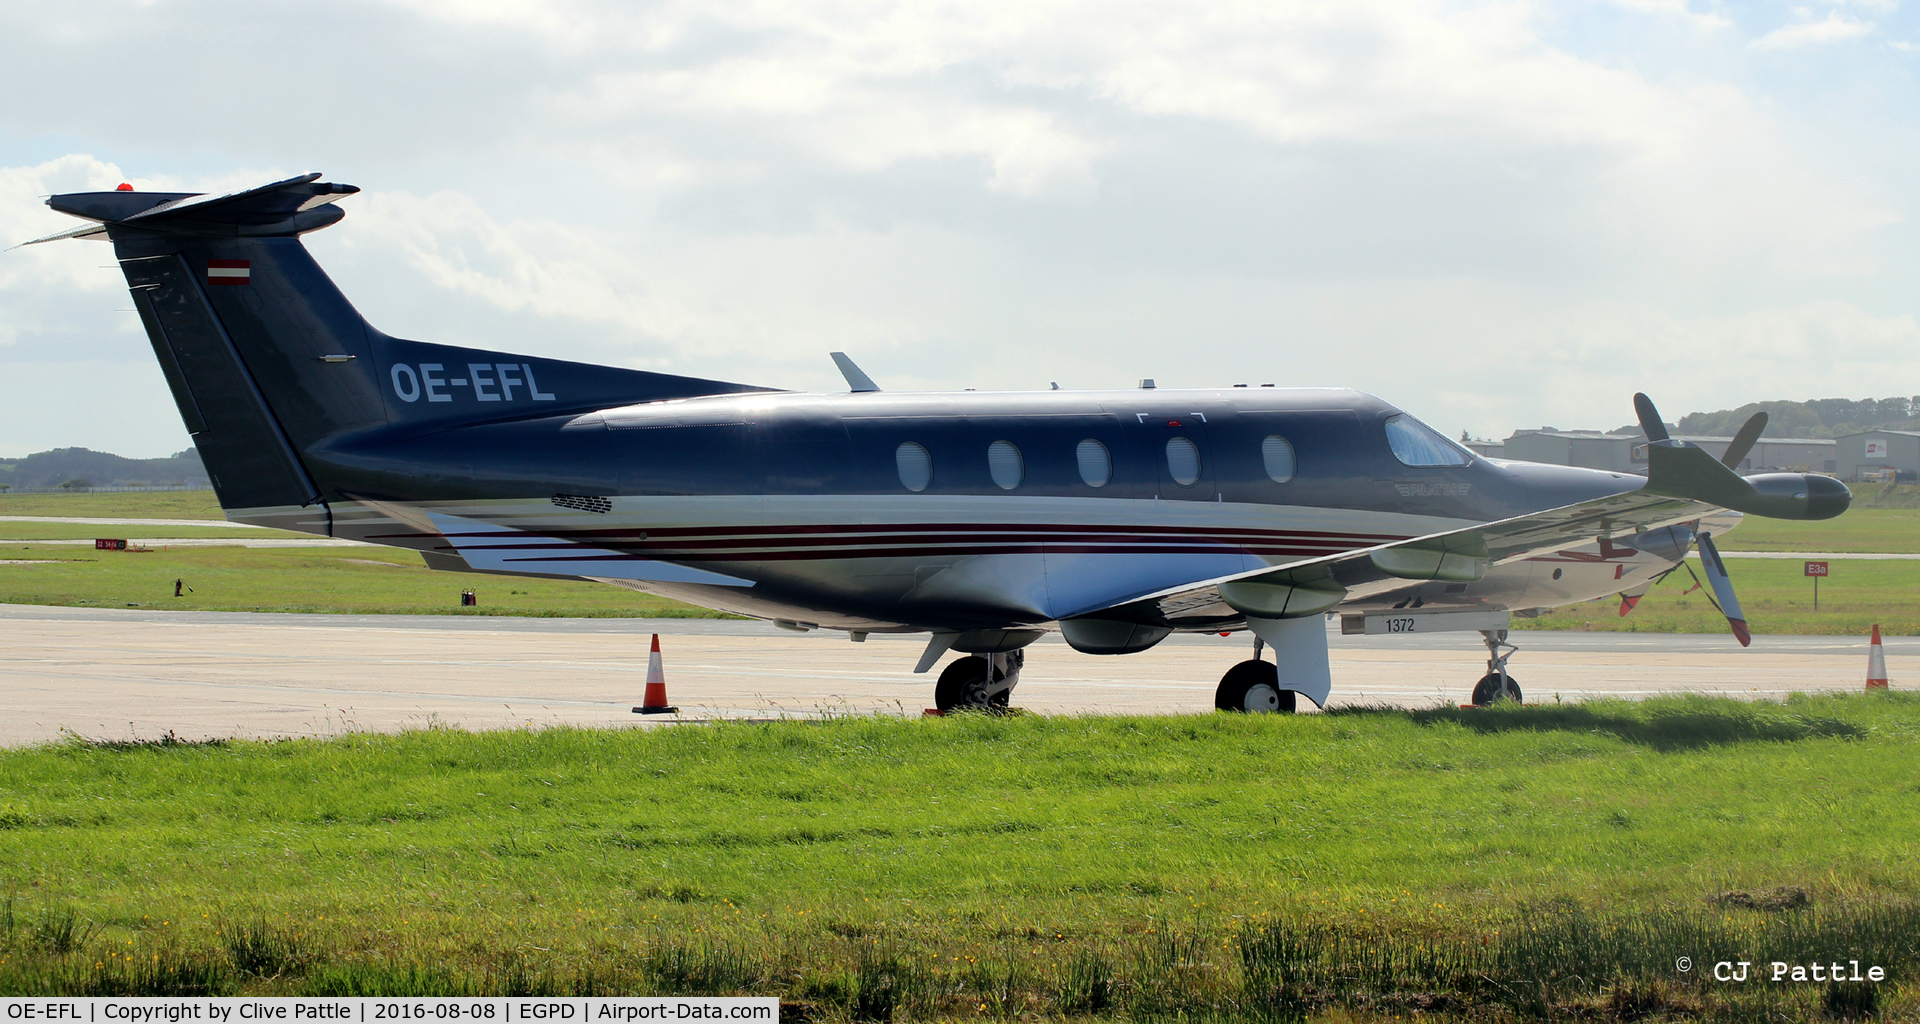 OE-EFL, 2012 Pilatus PC-12/47E C/N 1372, Parked up on south side apron at Aberdeen